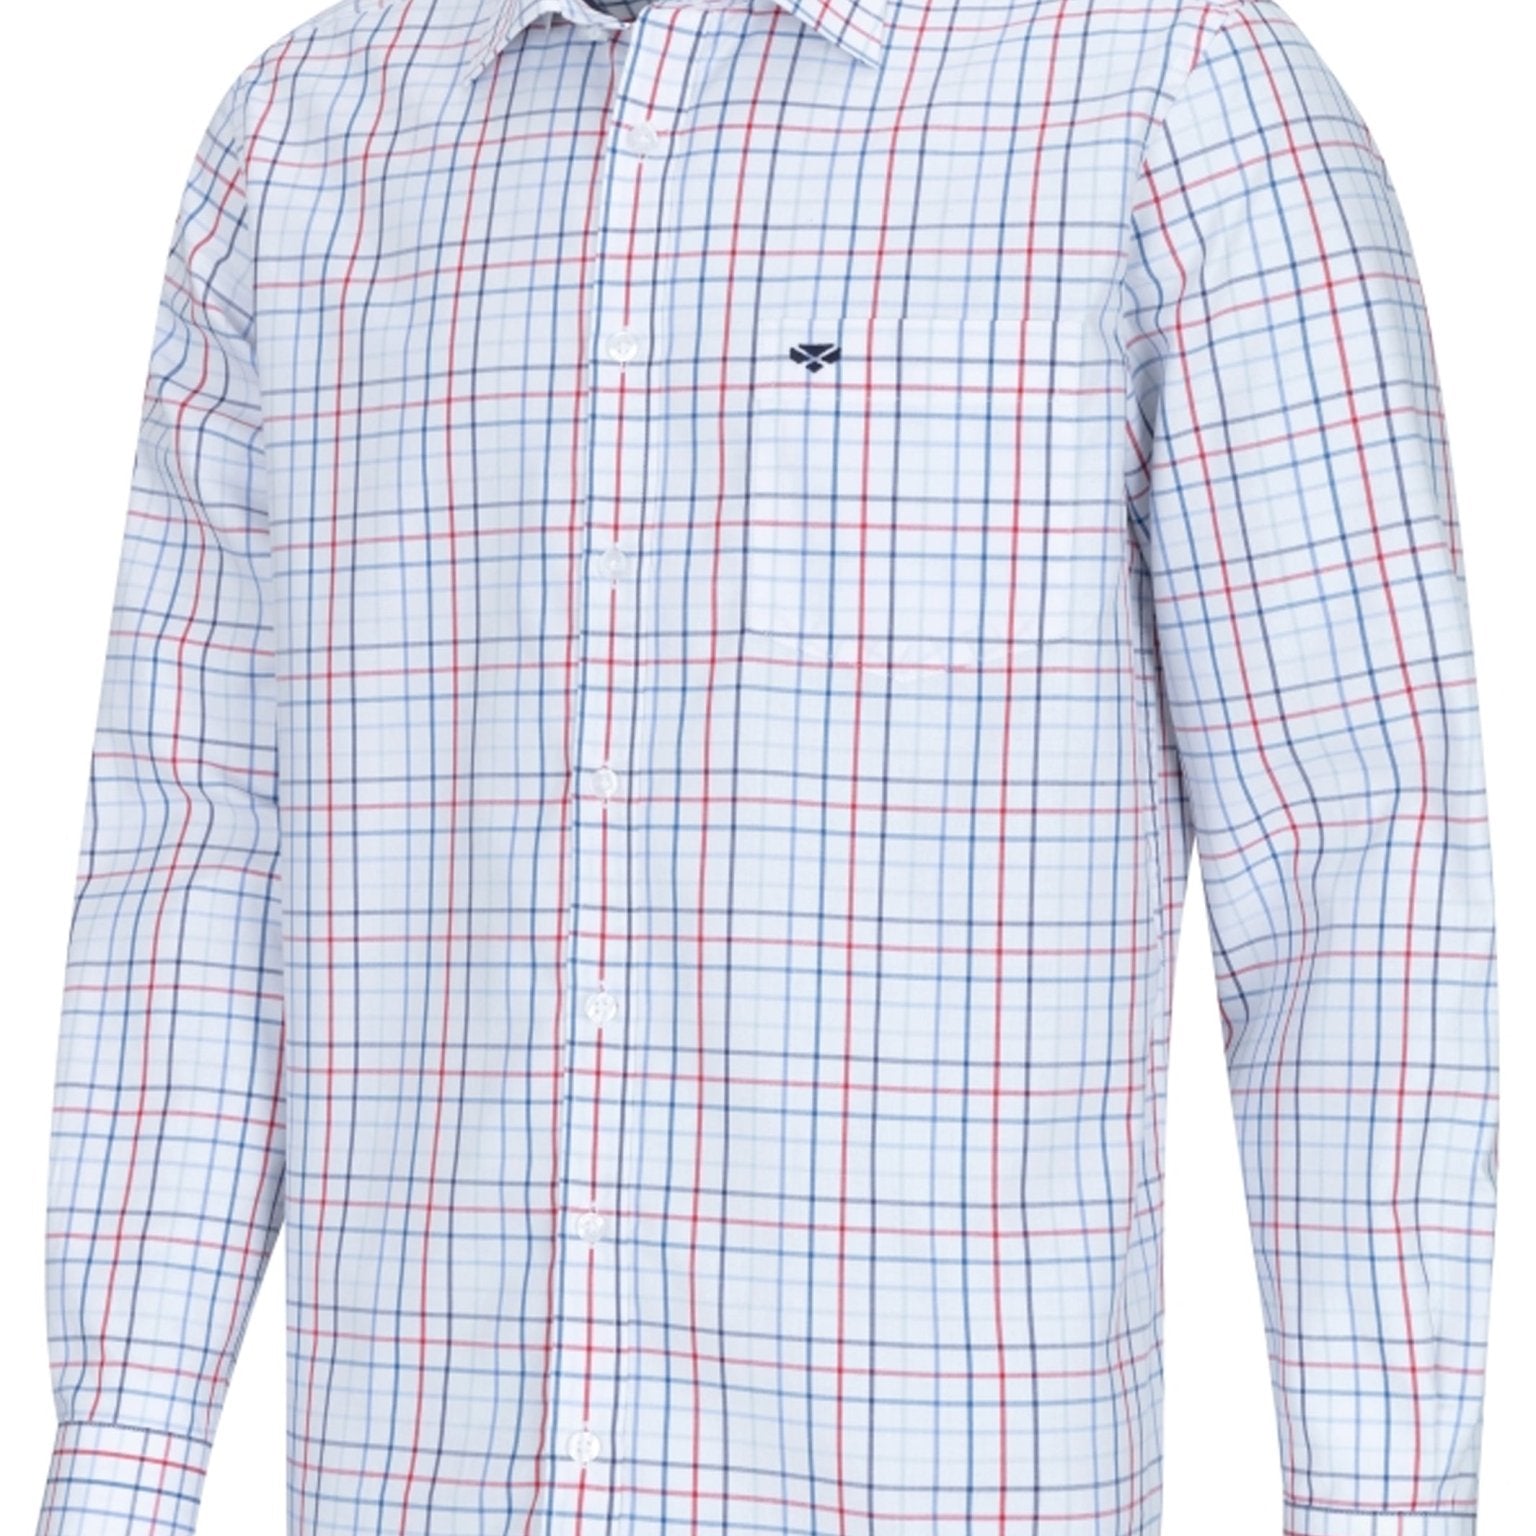 4elementsclothingHoggs of FifeHoggs of Fife - Turnberry Mens Shirt Twill CottonShirtTURN/RN/1